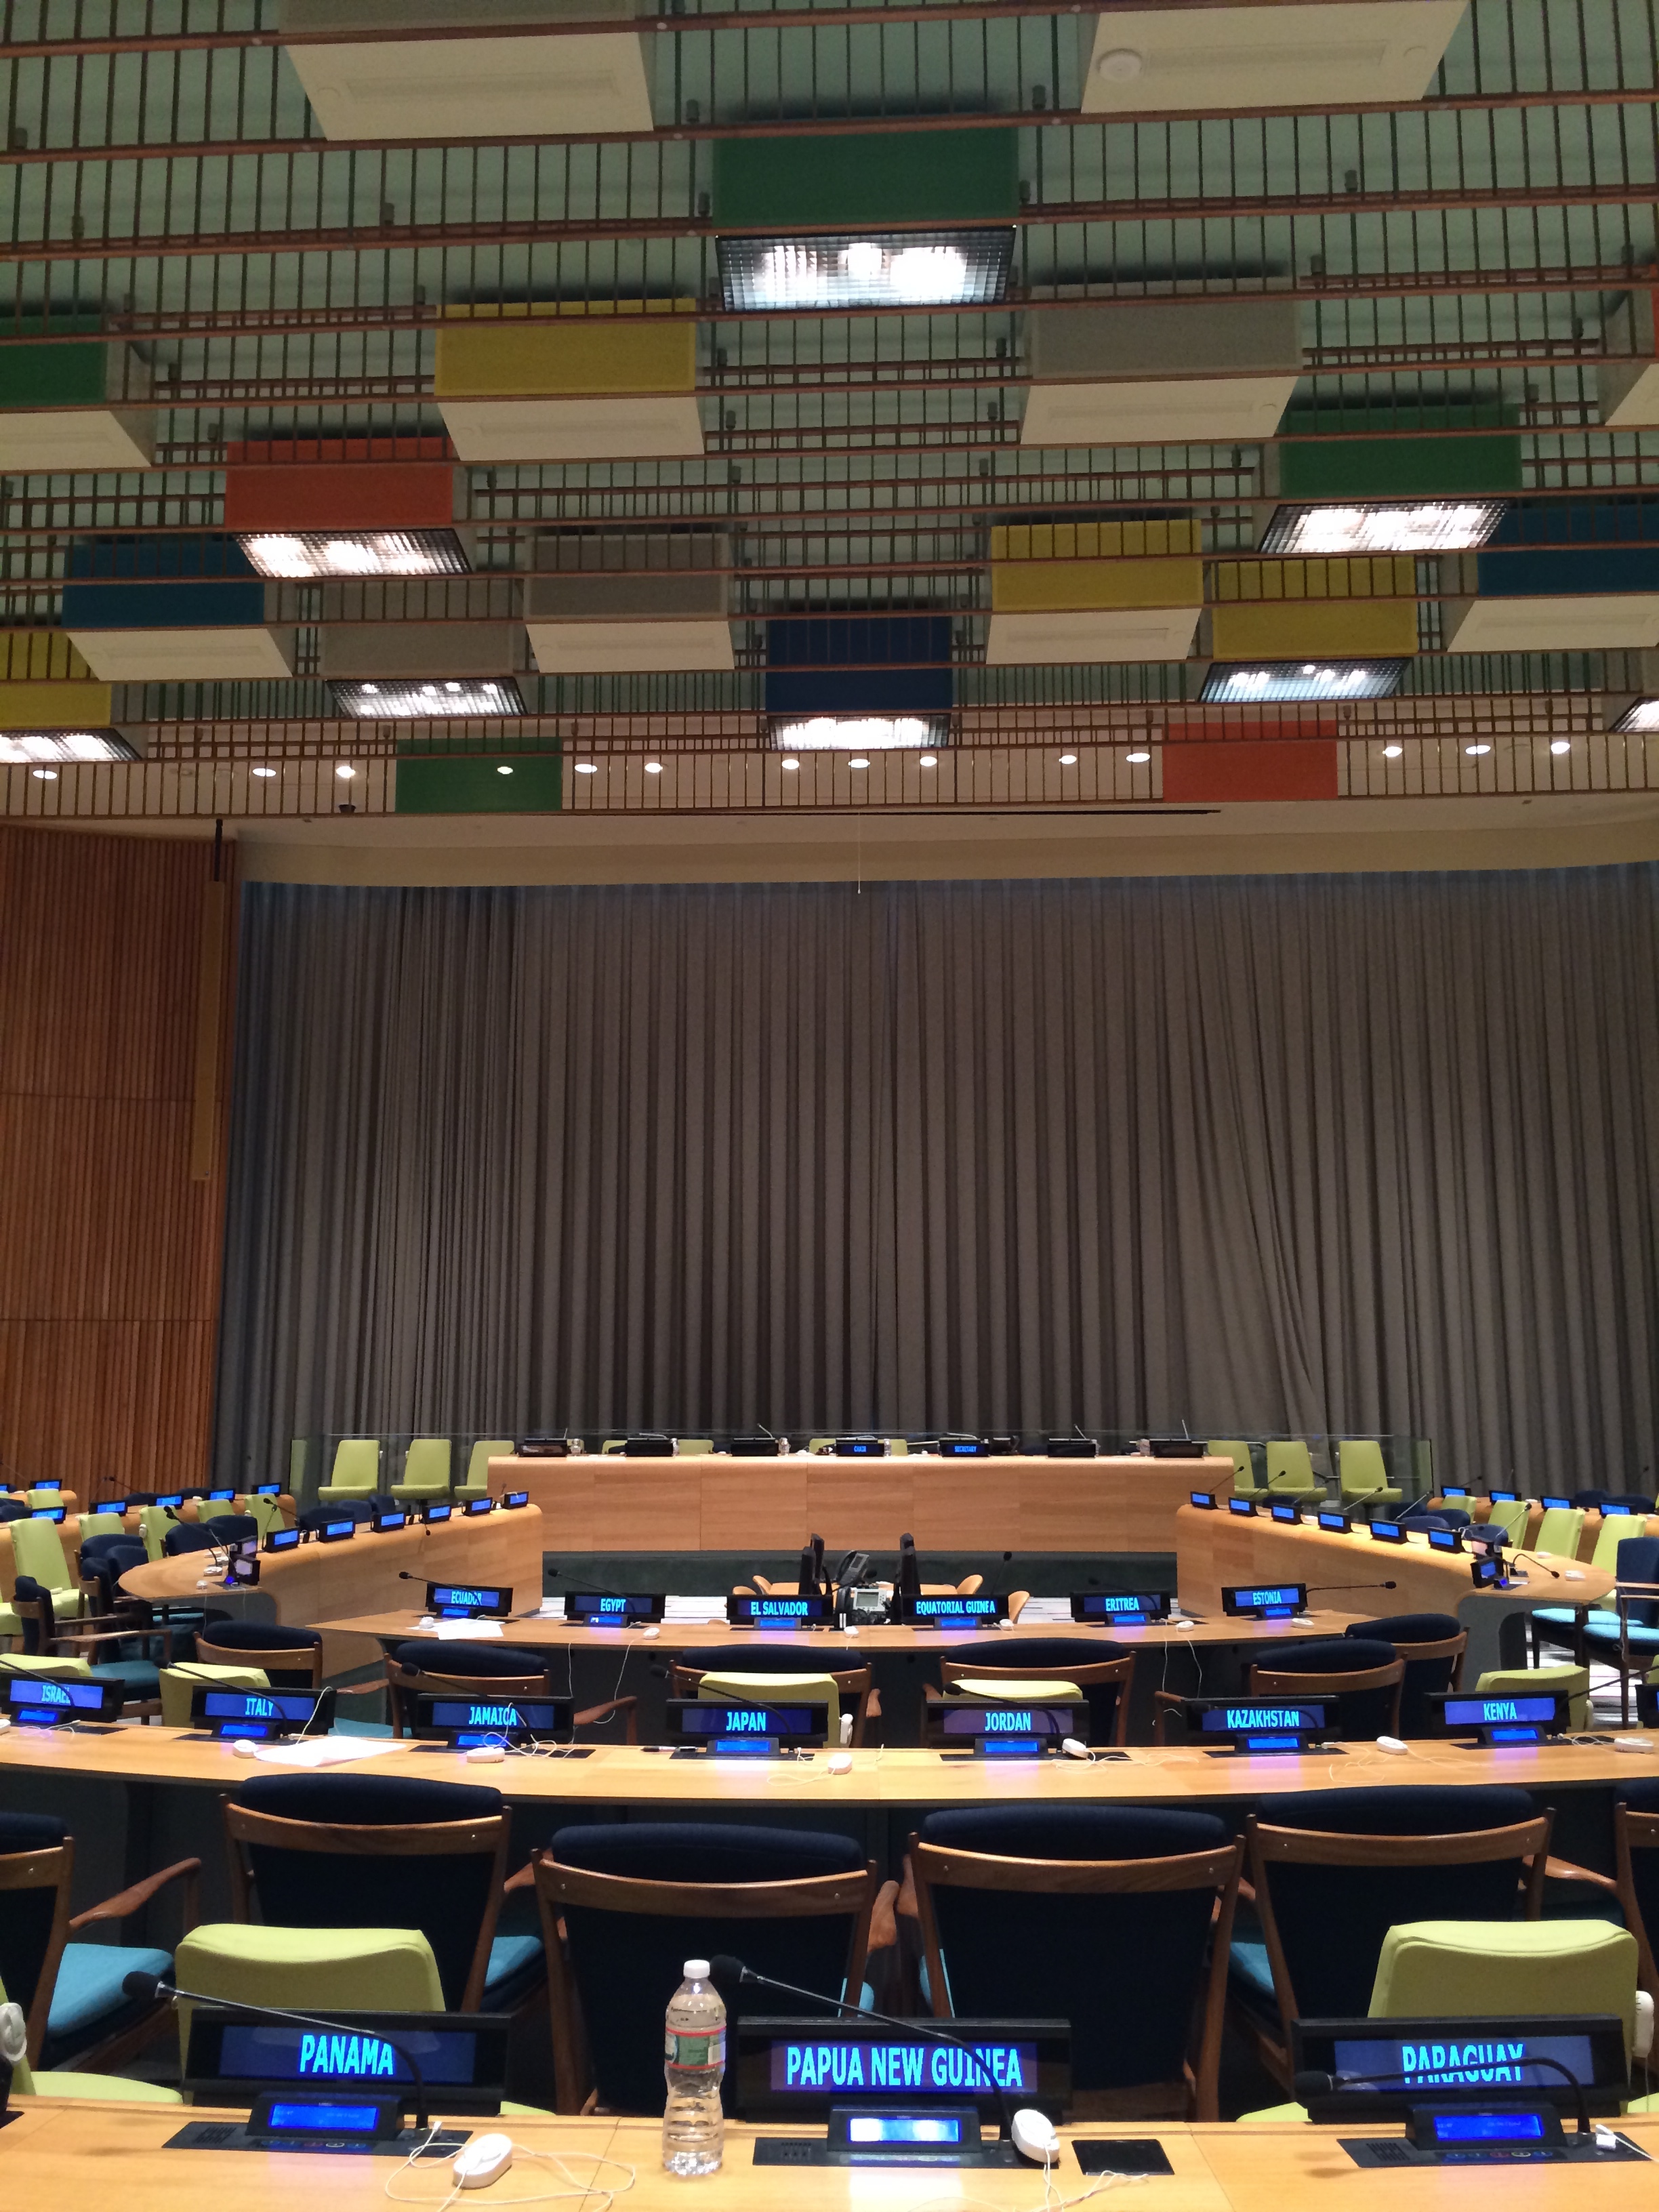 SQUARING THE CIRCLE...box lights in primary colors at the Trusteeship Council Chamber